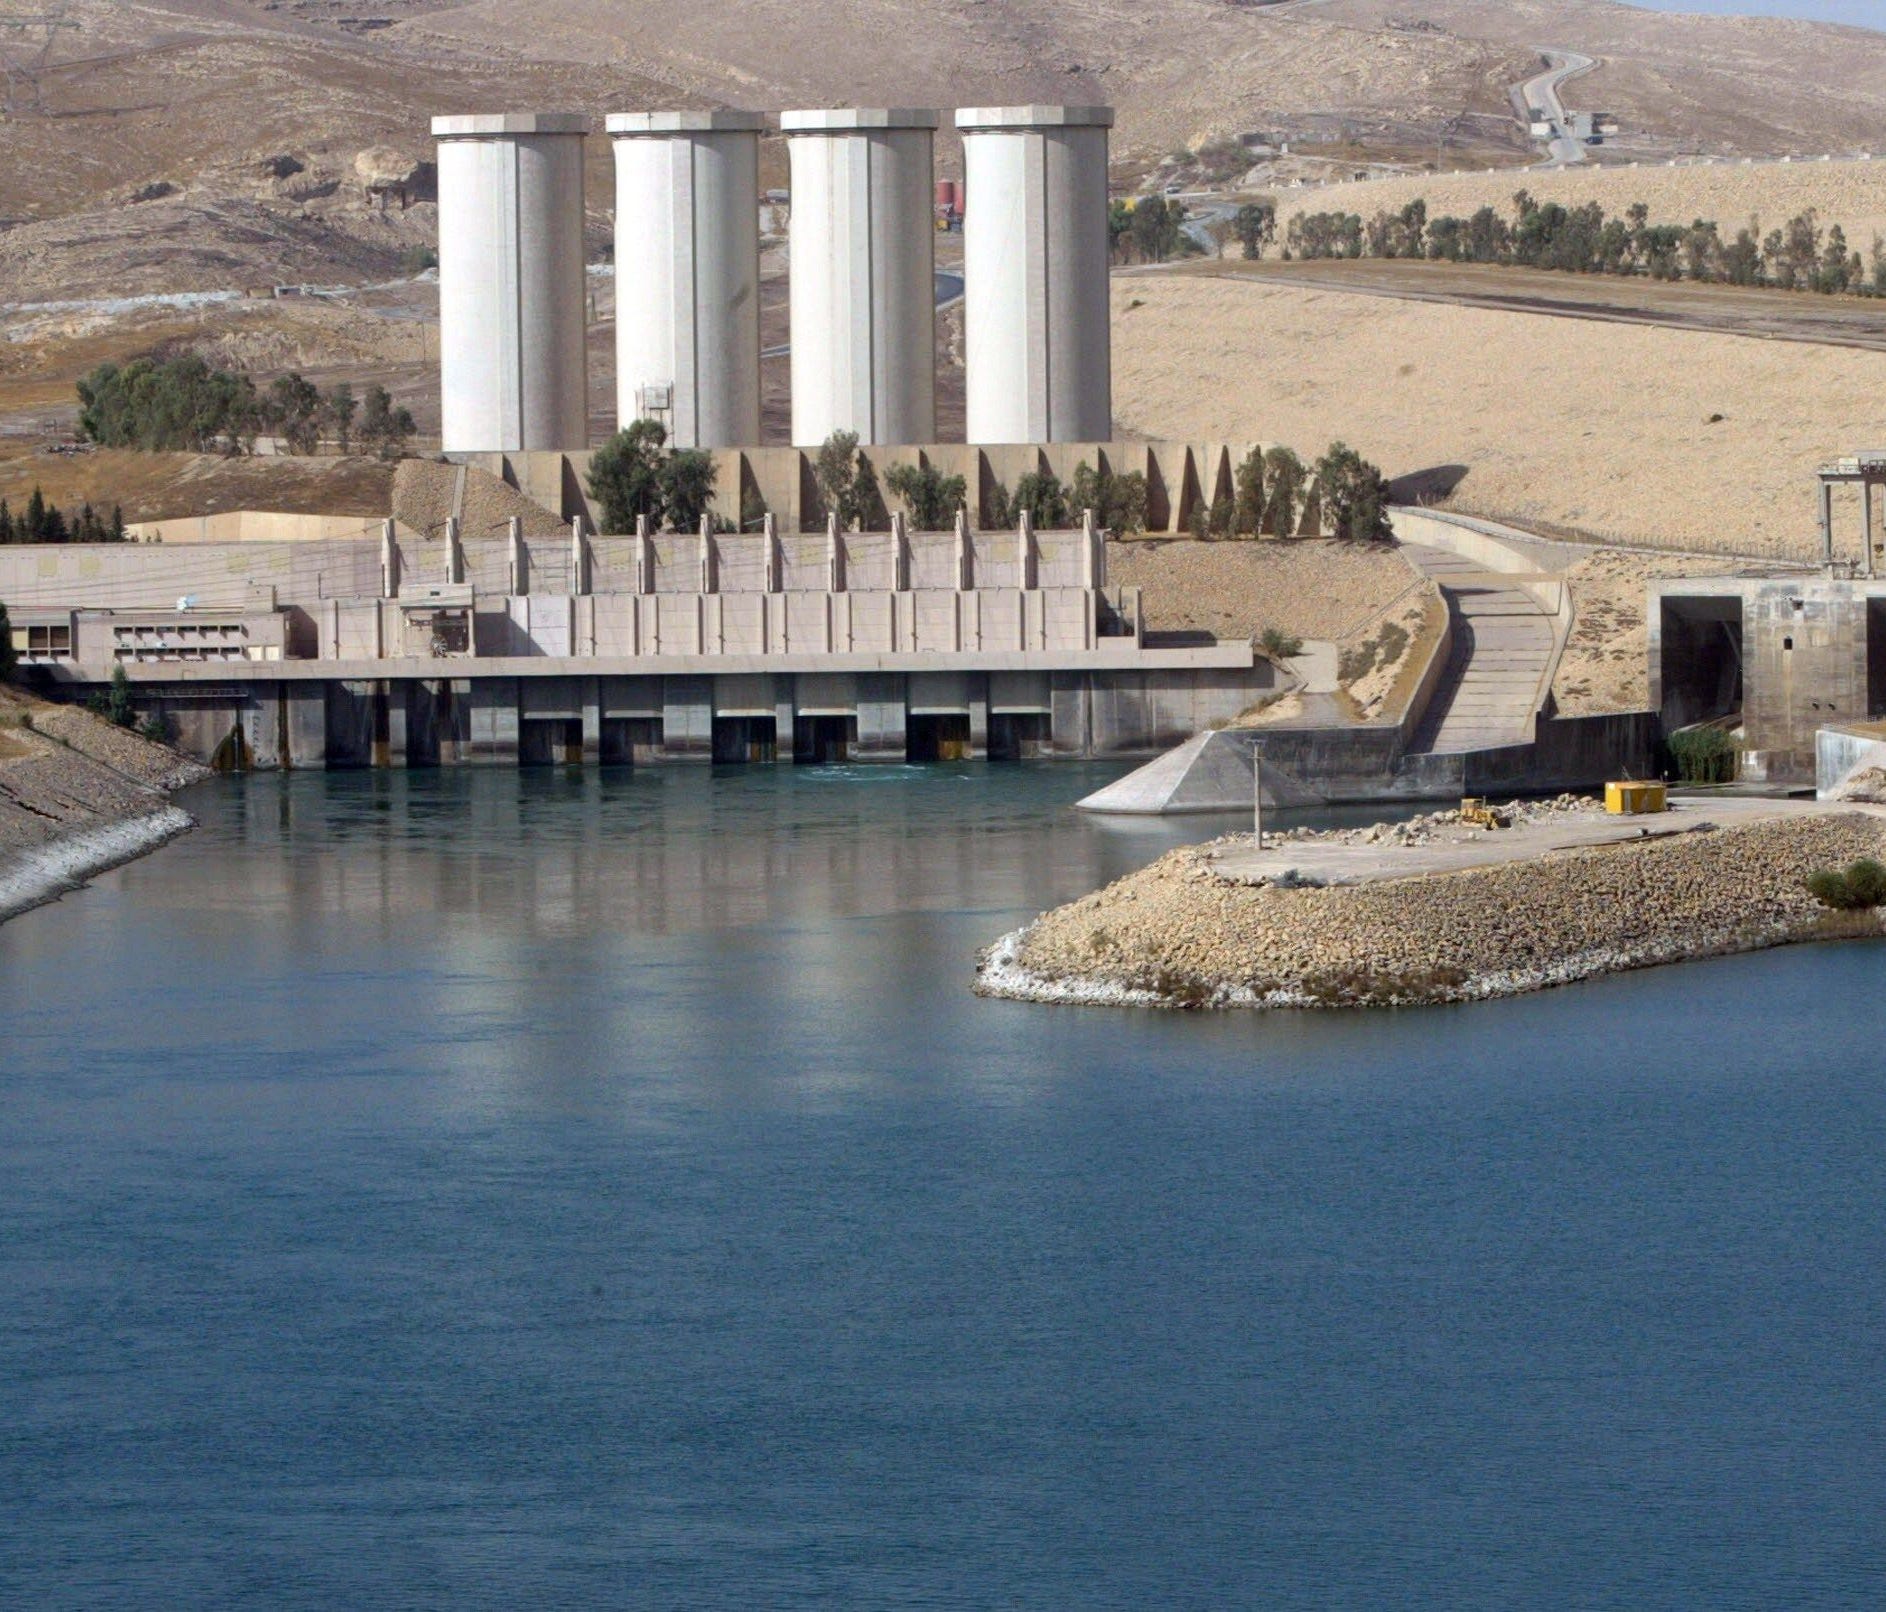 A general view shows the Mosul dam on the Tigris River on Oct. 31, 2007.